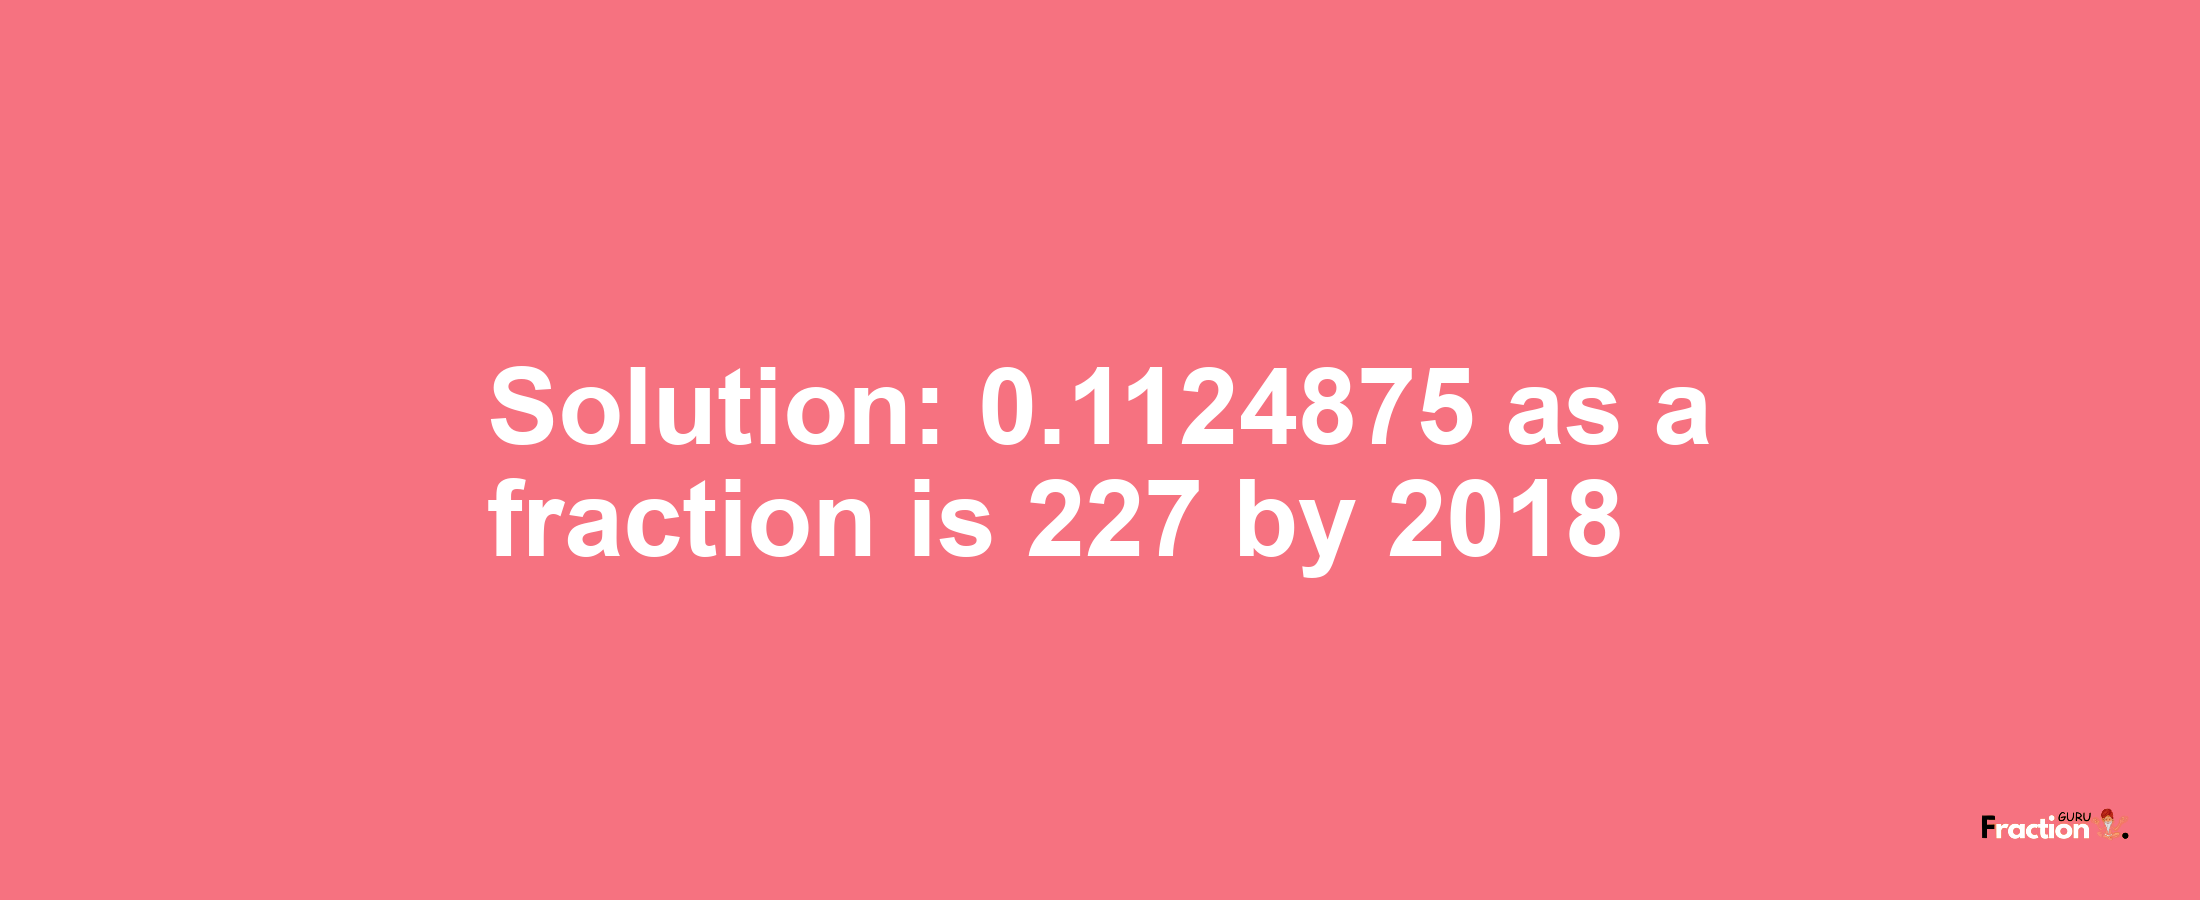 Solution:0.1124875 as a fraction is 227/2018